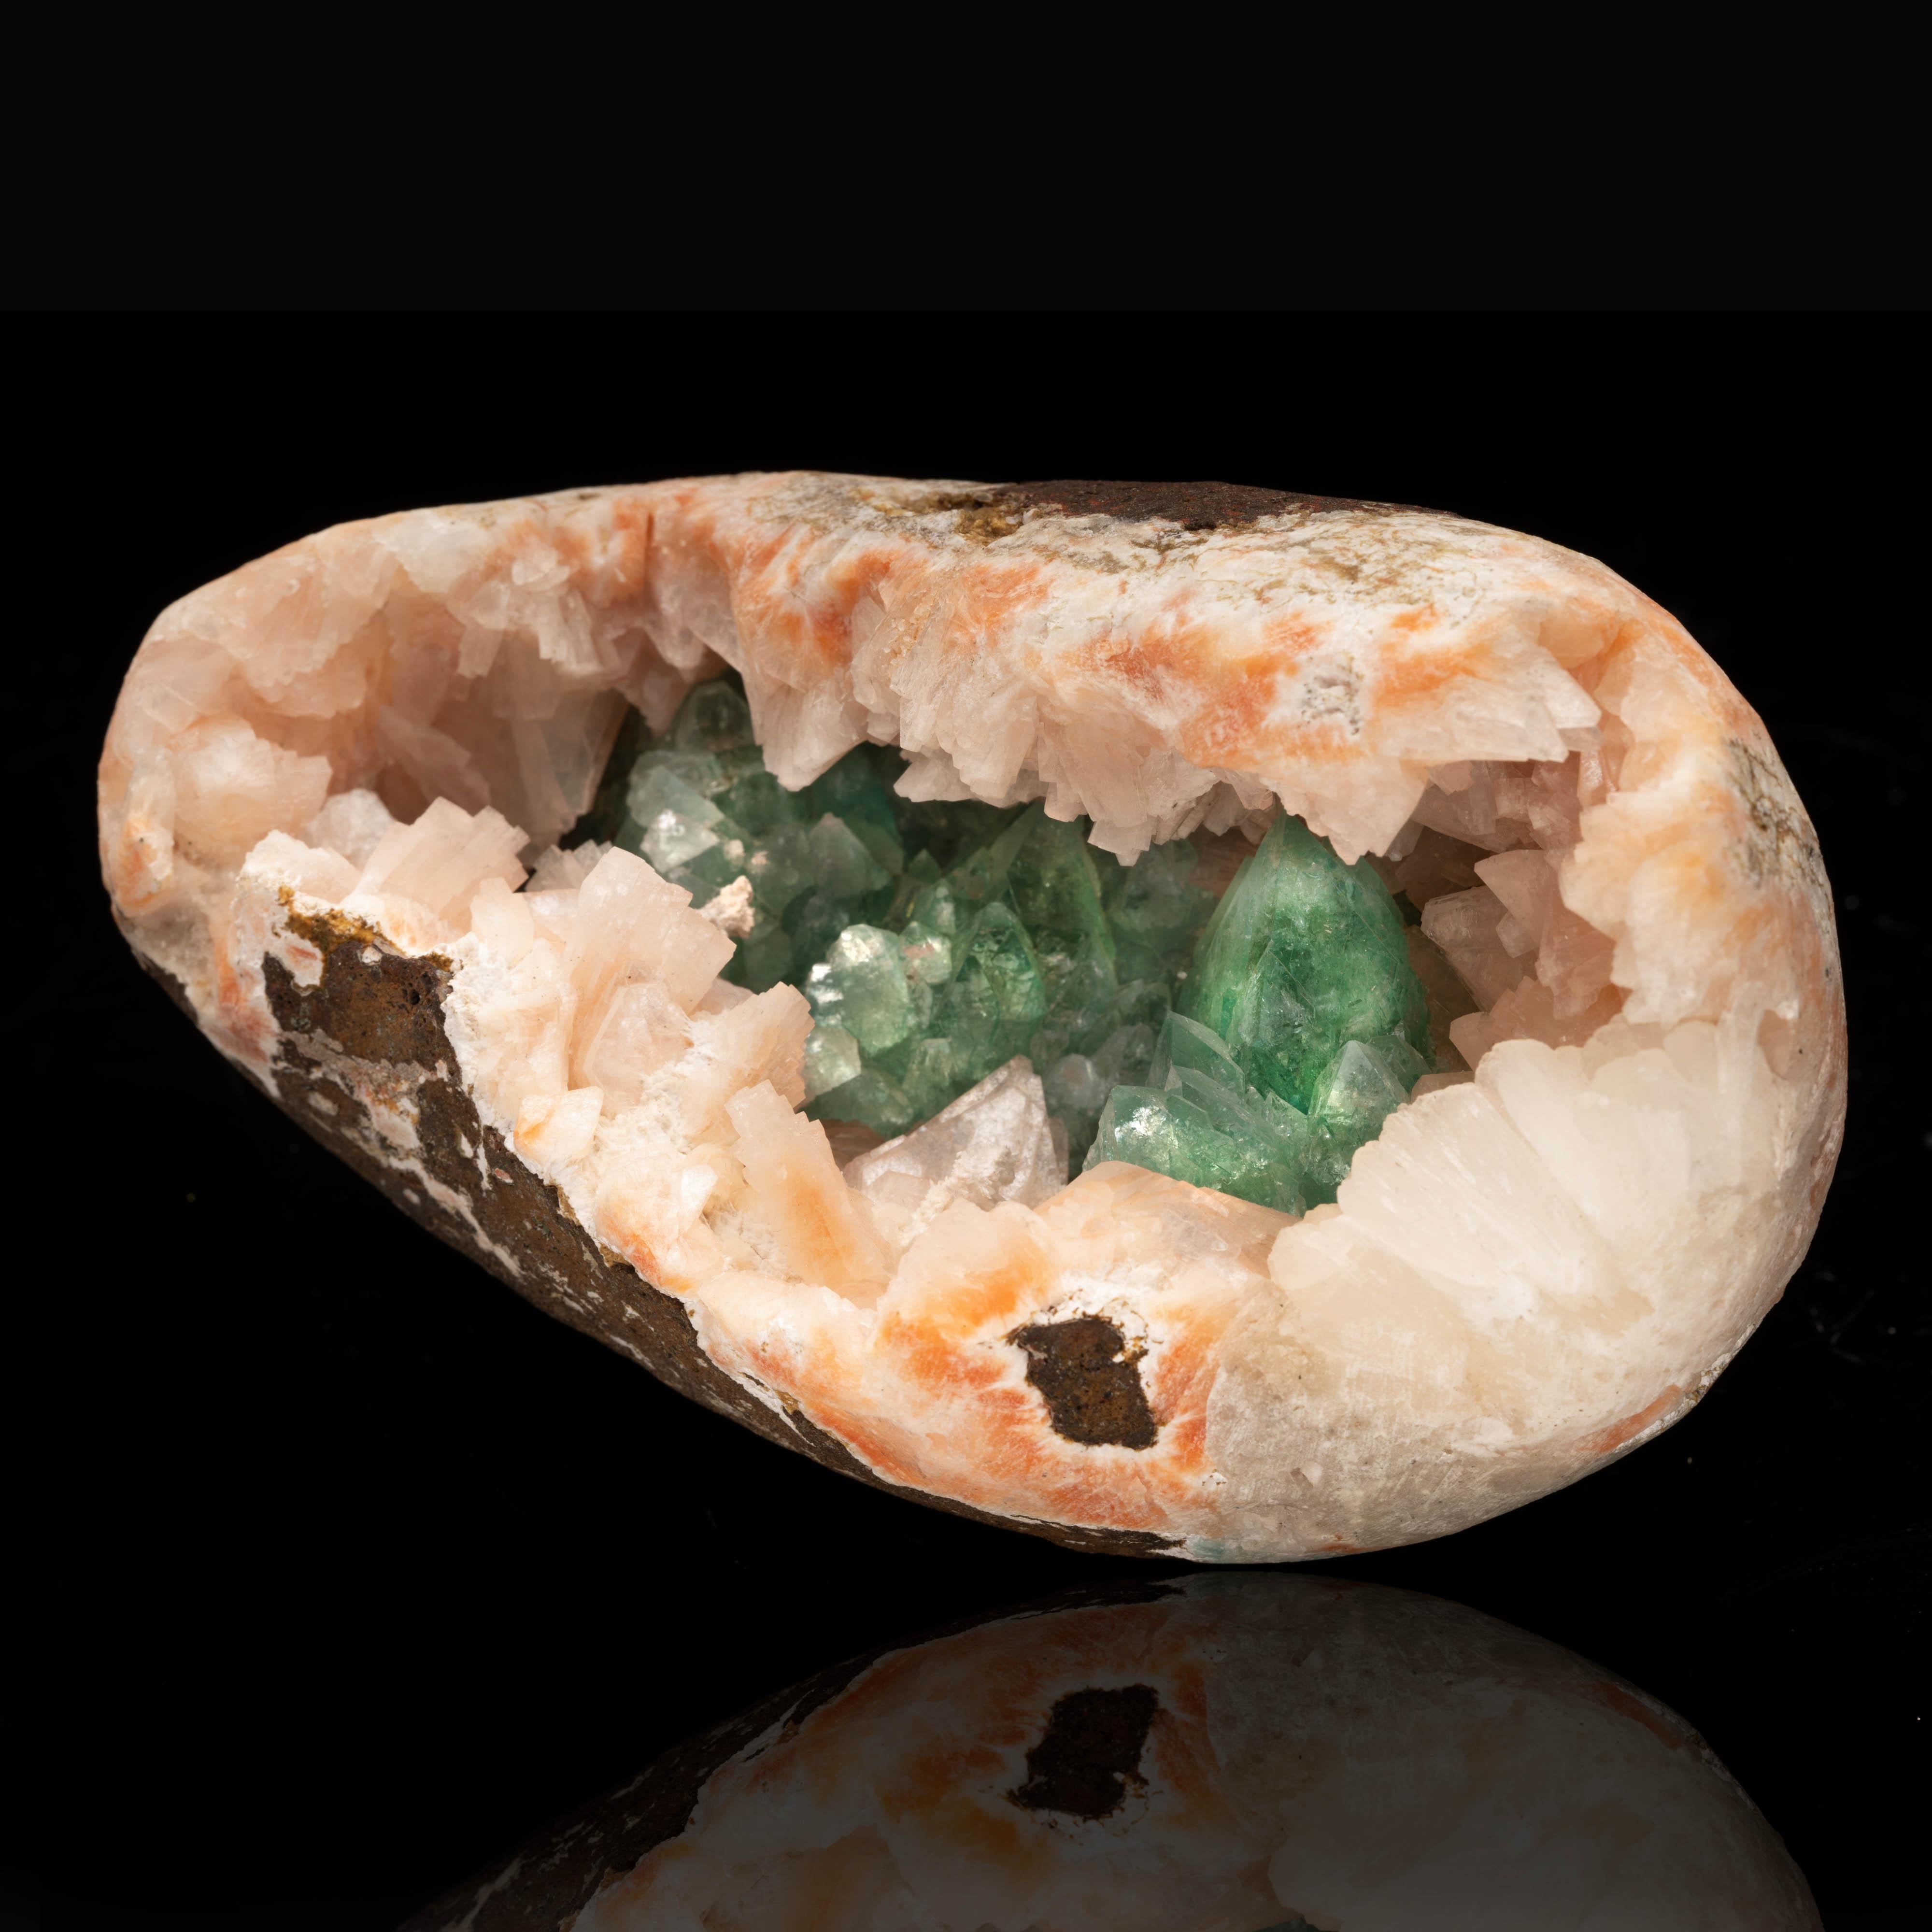 This unique combination specimen is a vug or natural crystal-lined cavity formed from peach stilbite, which has crystallized in gemmy points over the surface of its hollow interior. For further interest, this vug is stuffed with impossibly deeply